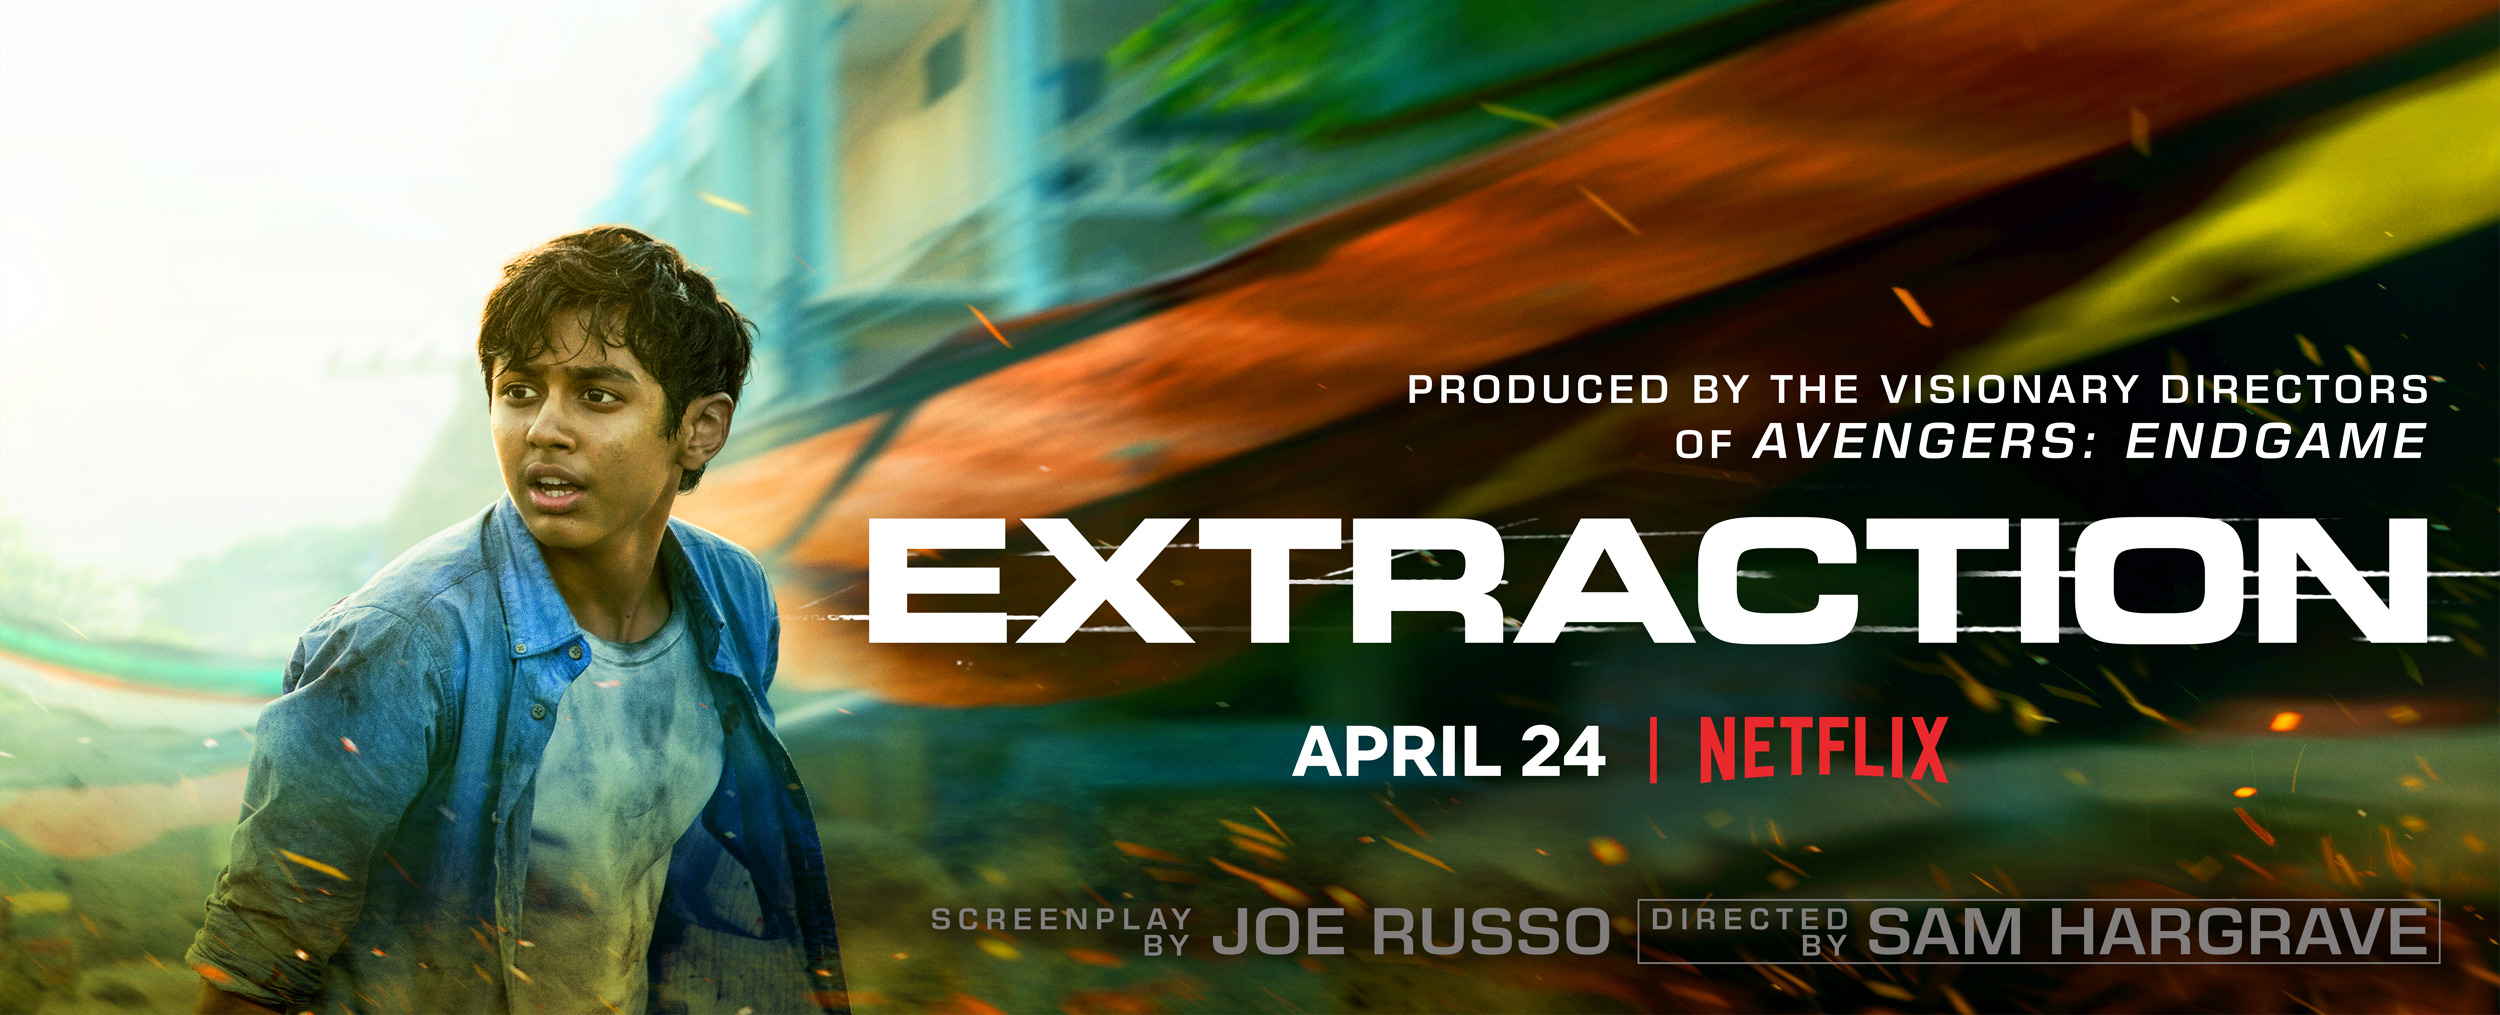 Mega Sized TV Poster Image for Extraction (#5 of 7)